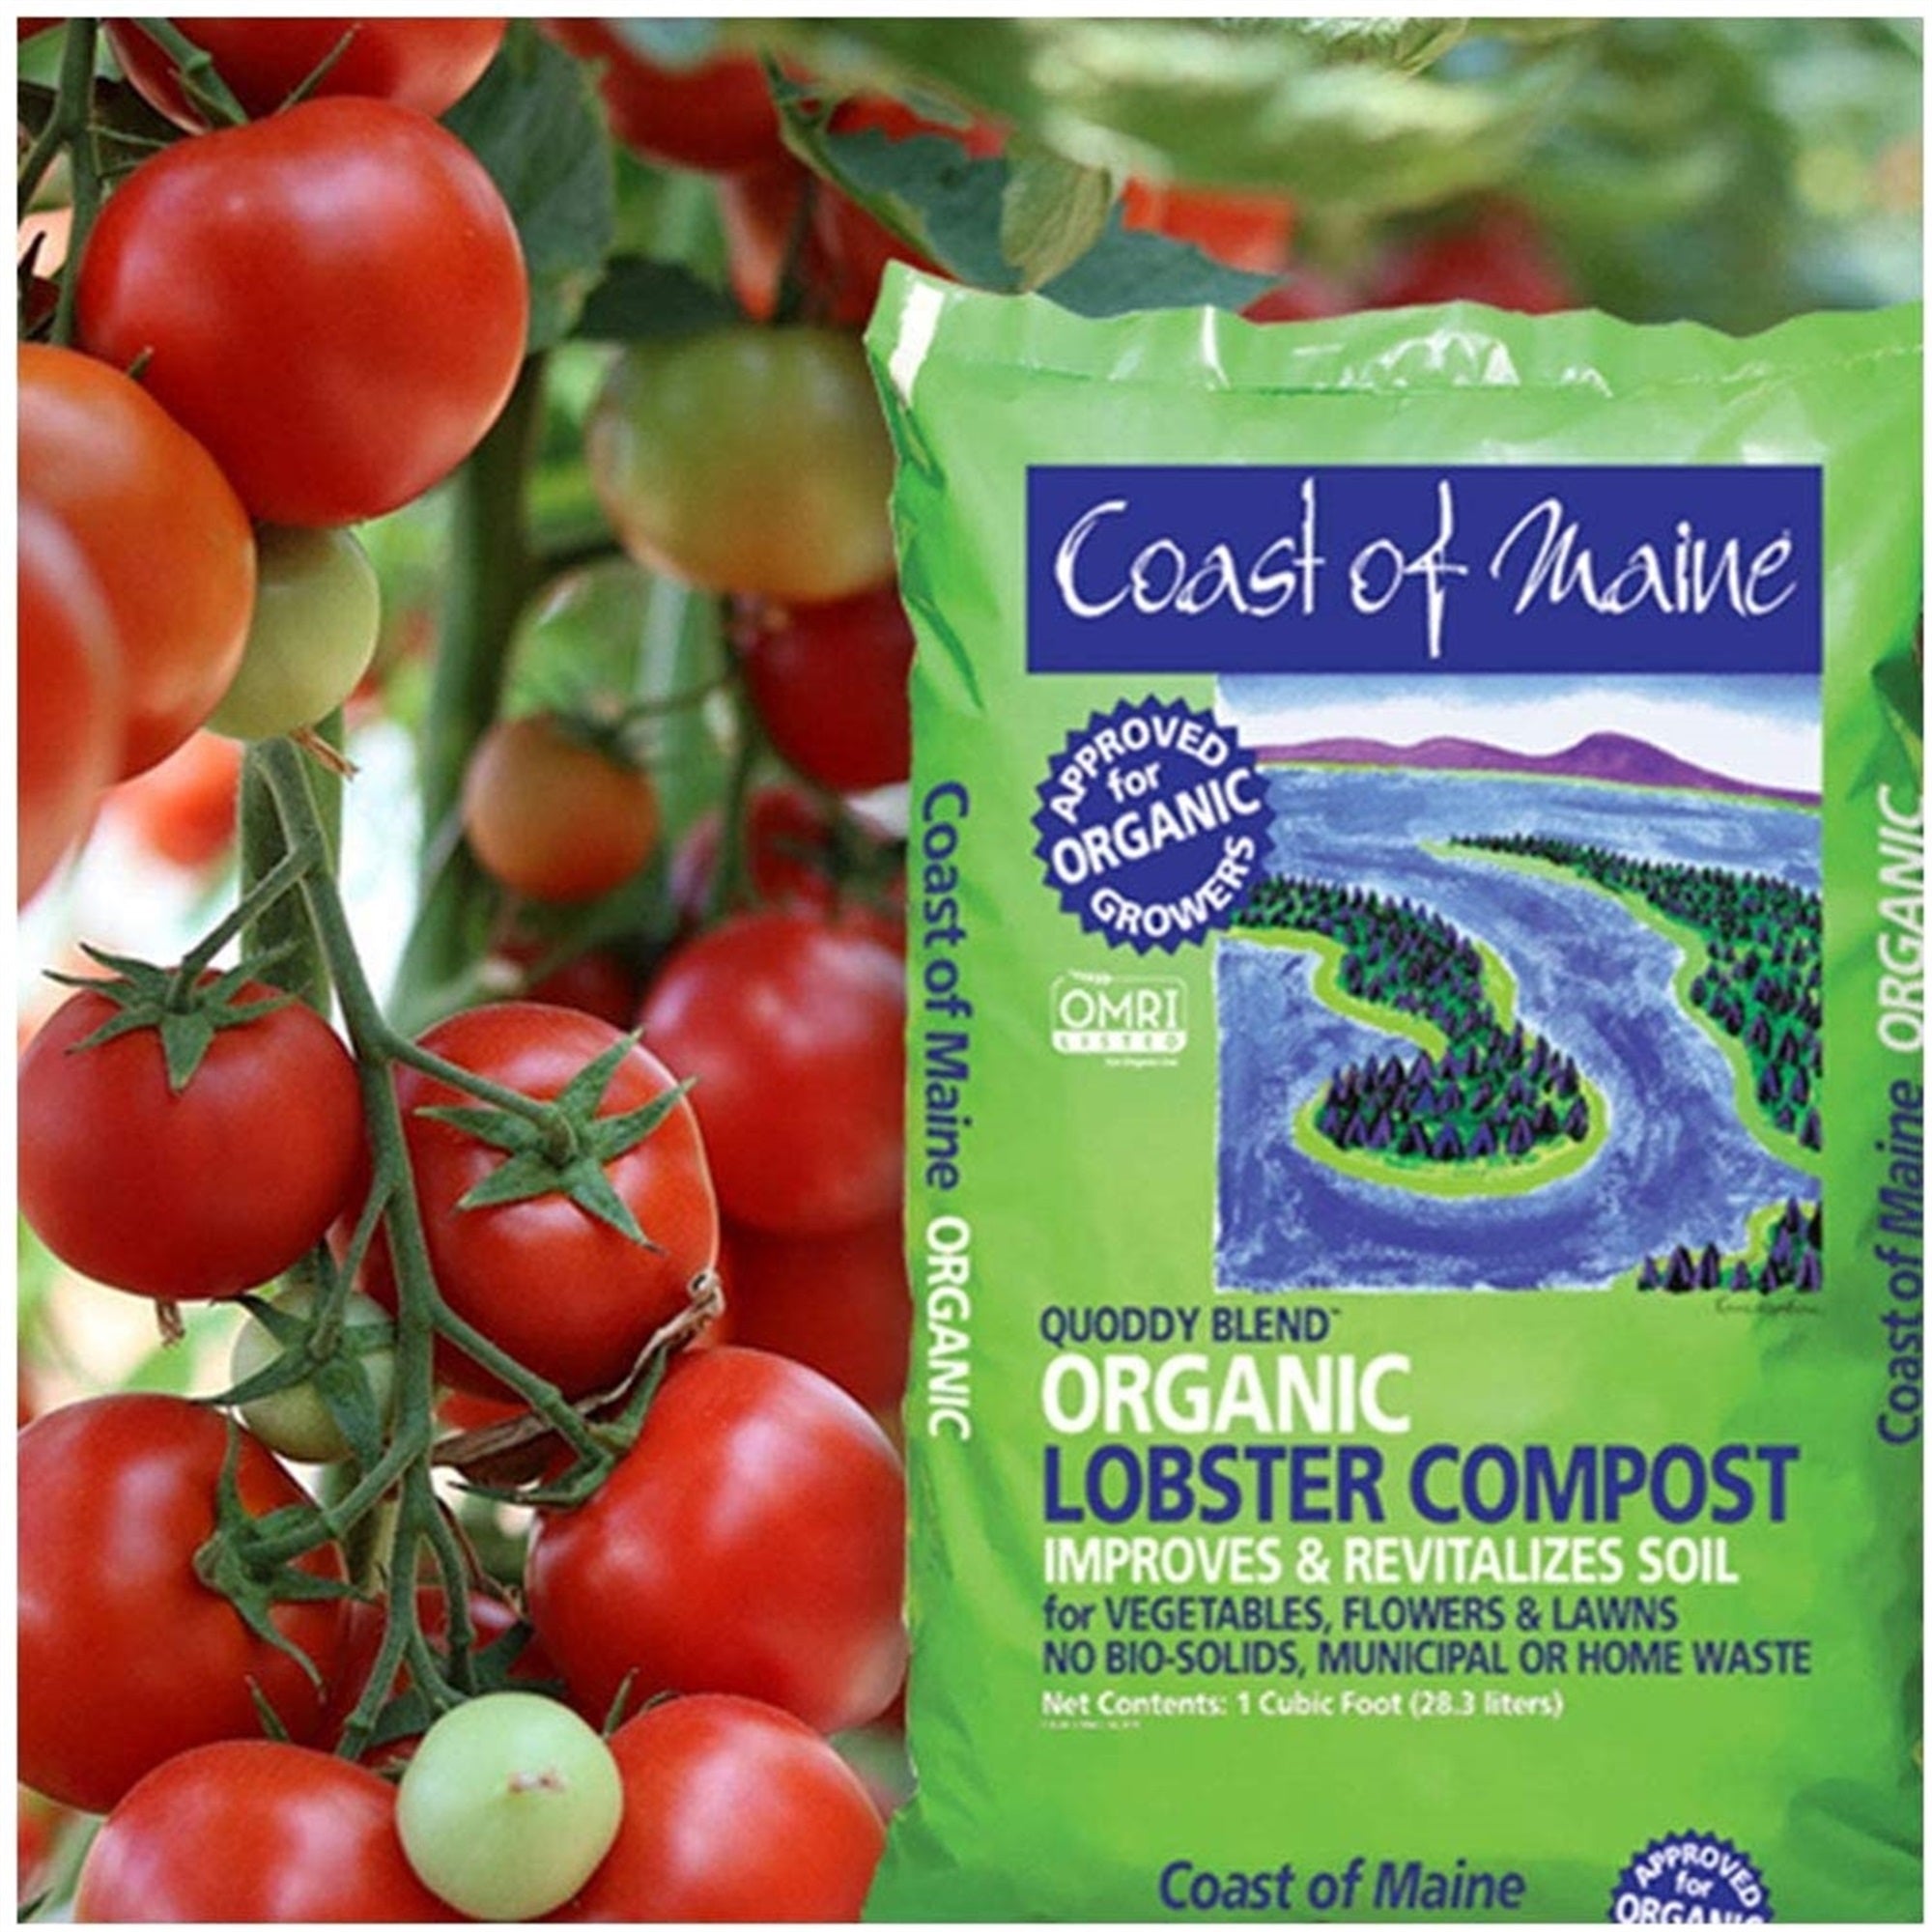 Coast of Maine Quoddy Blend Organic Lobster Compost, Improves & Revitalizes Soil, 1 CF